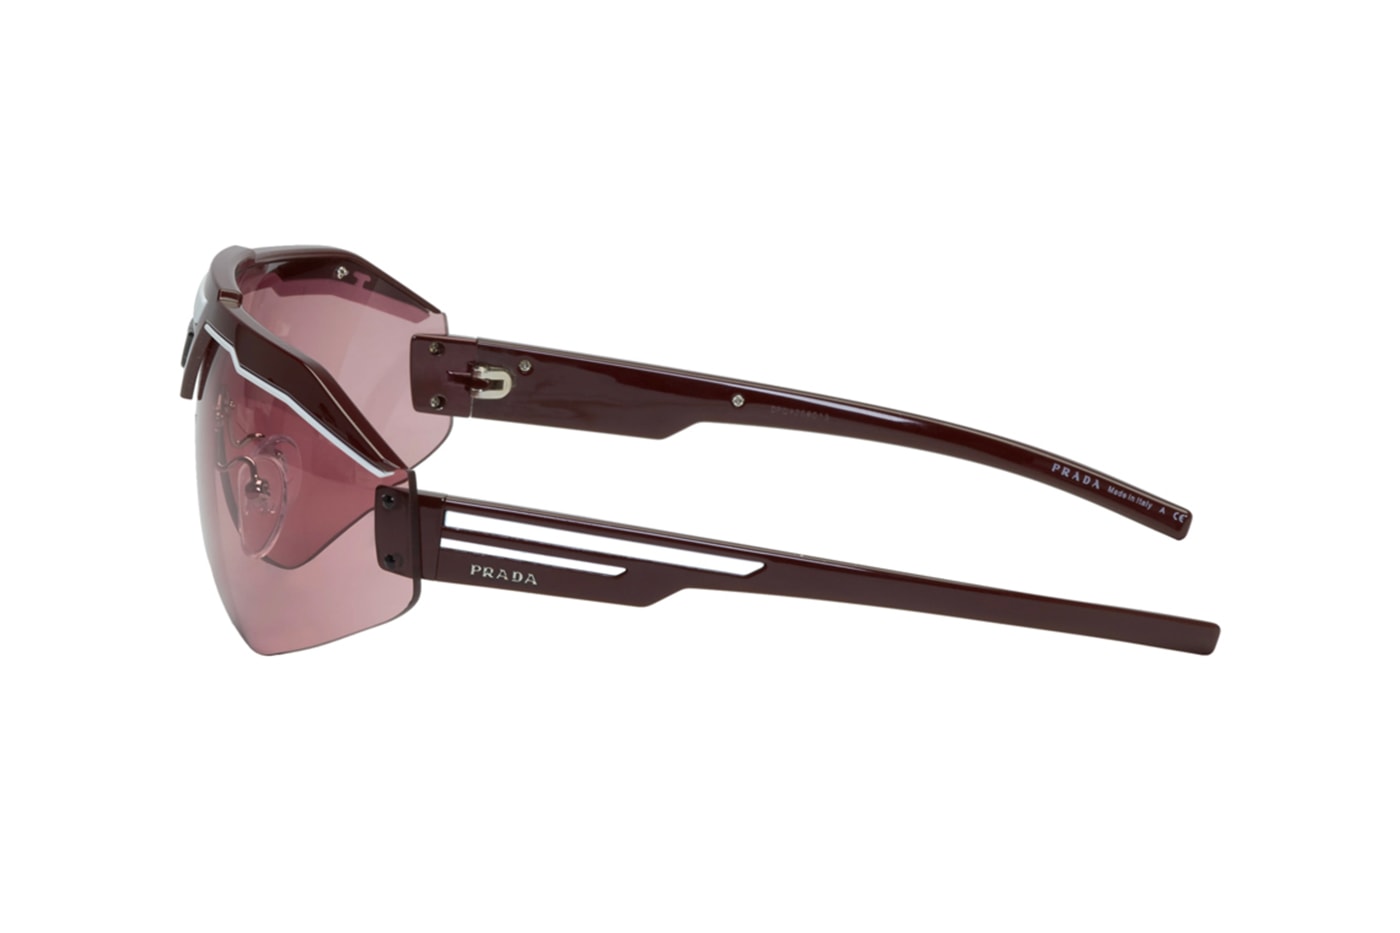 Prada FW19 Sunglasses Release Info italy black rubberized 192962M134514 drop date Green Mirrored Lens 192962M134516 Pink and Red Runway 192962M134519